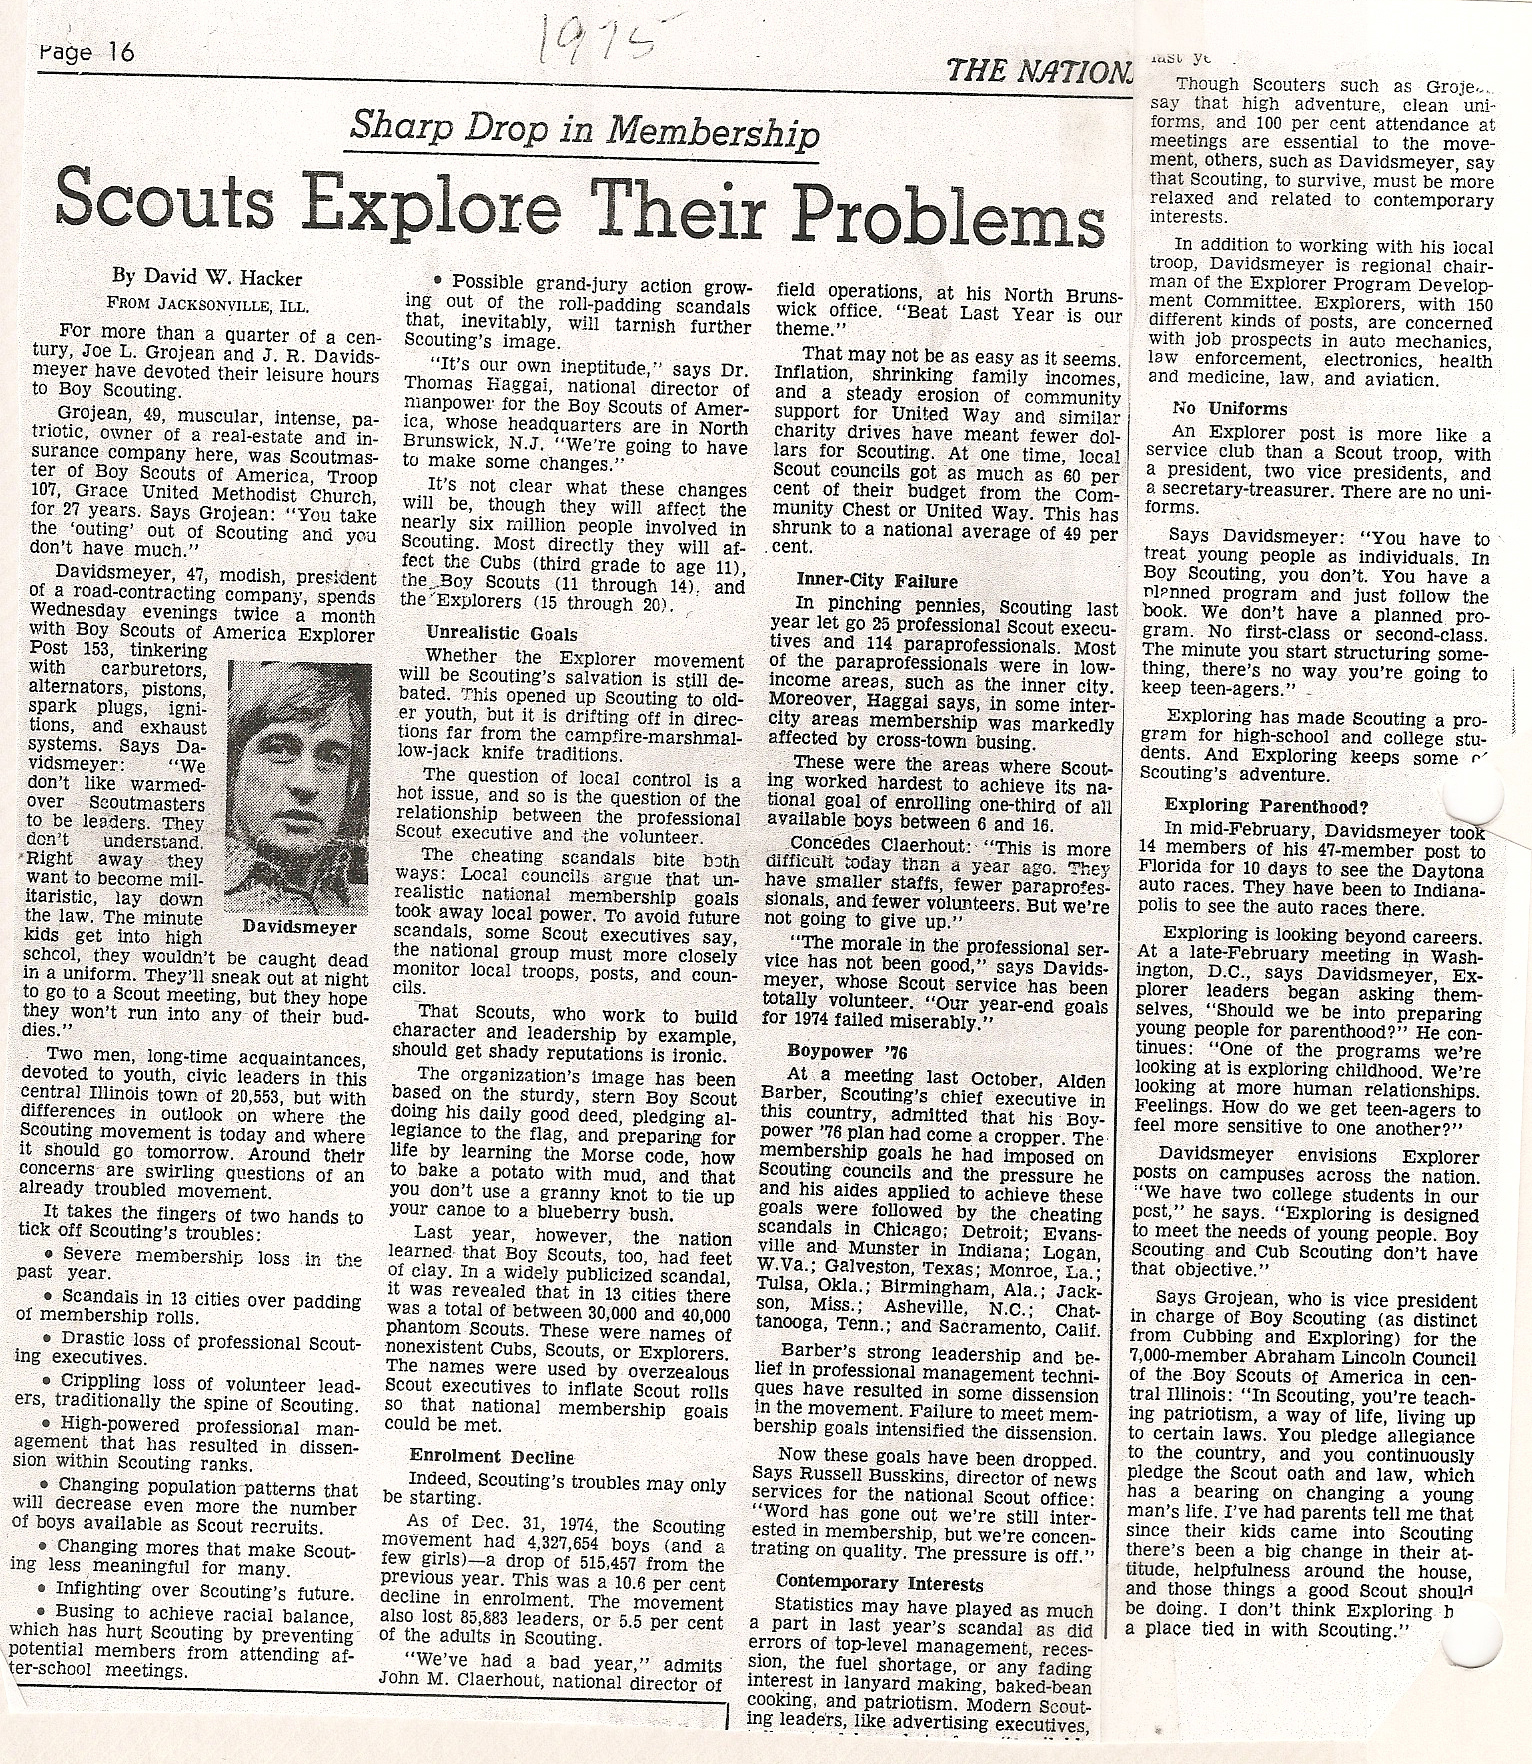 1975 Scout Article